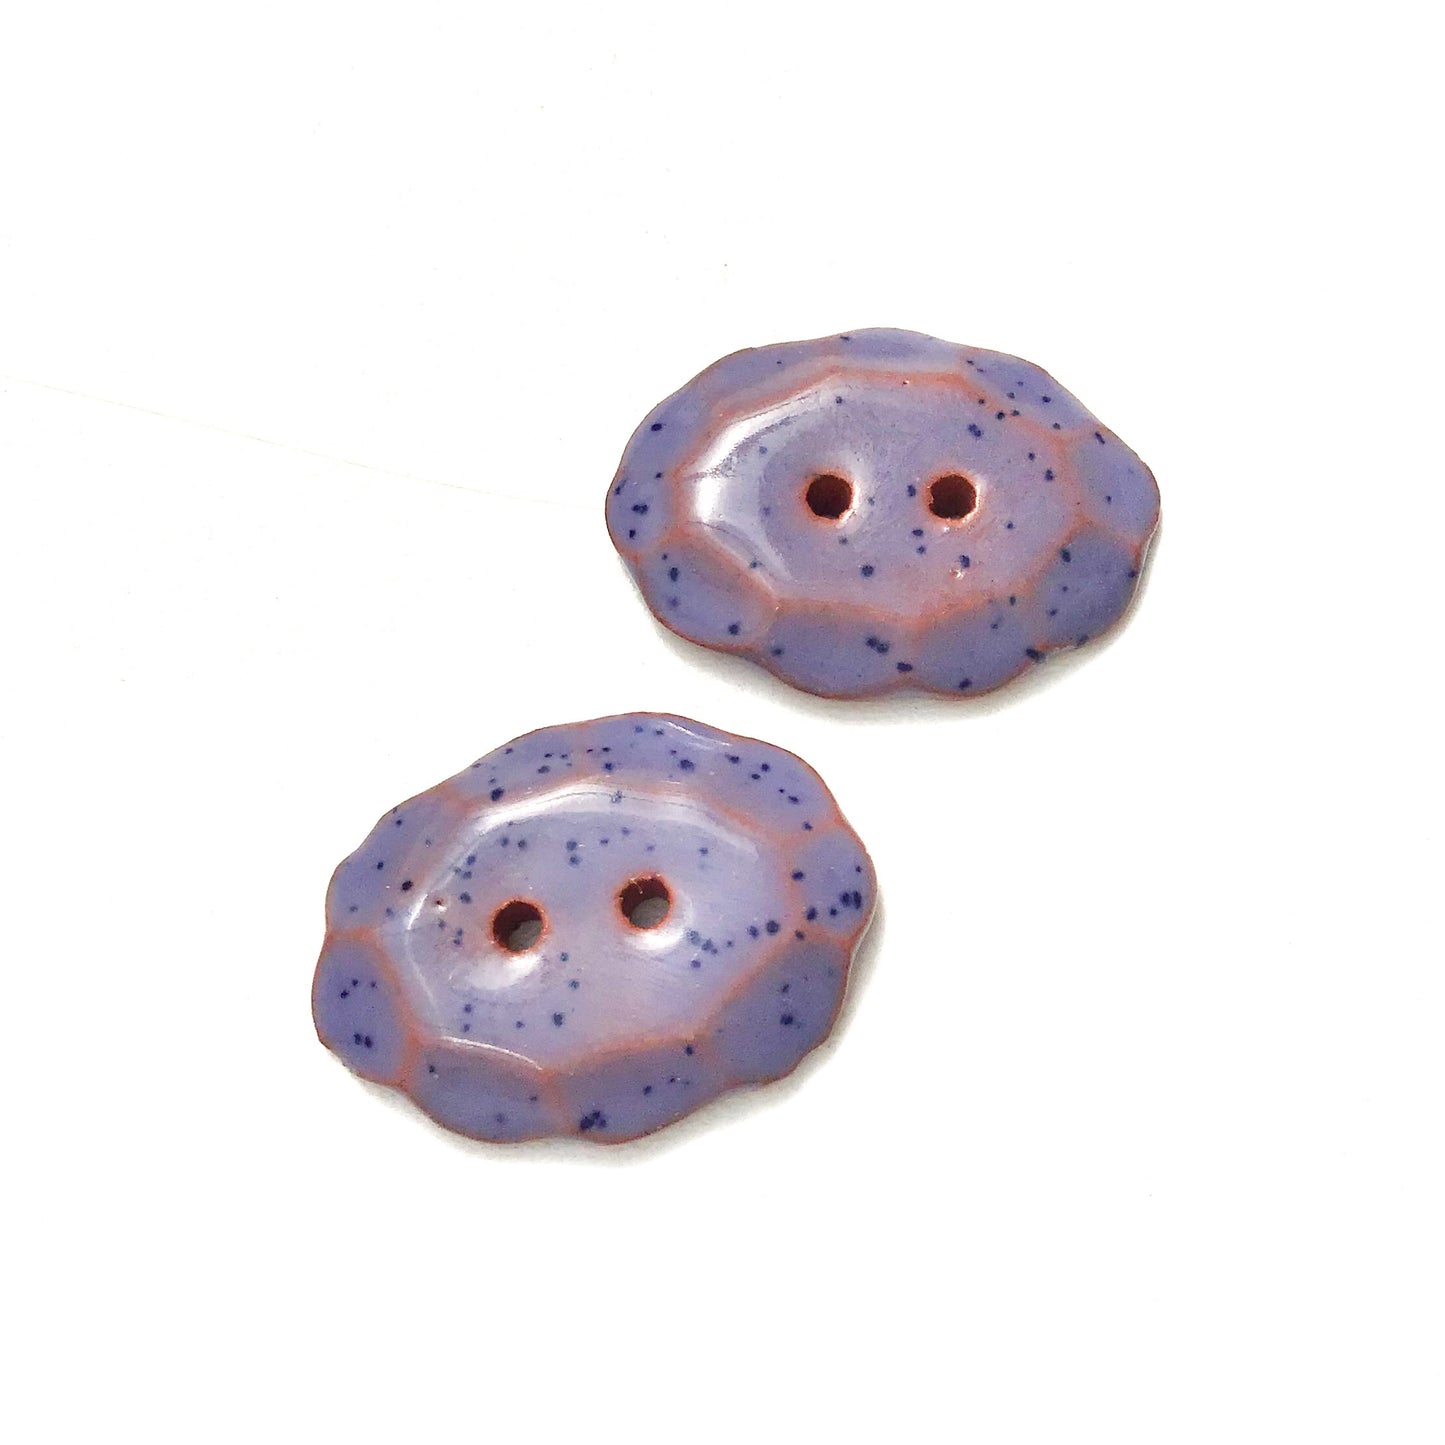 Speckled Purple Ceramic Buttons - Oval Clay Buttons - 3/4" x 1" - 2 Pack